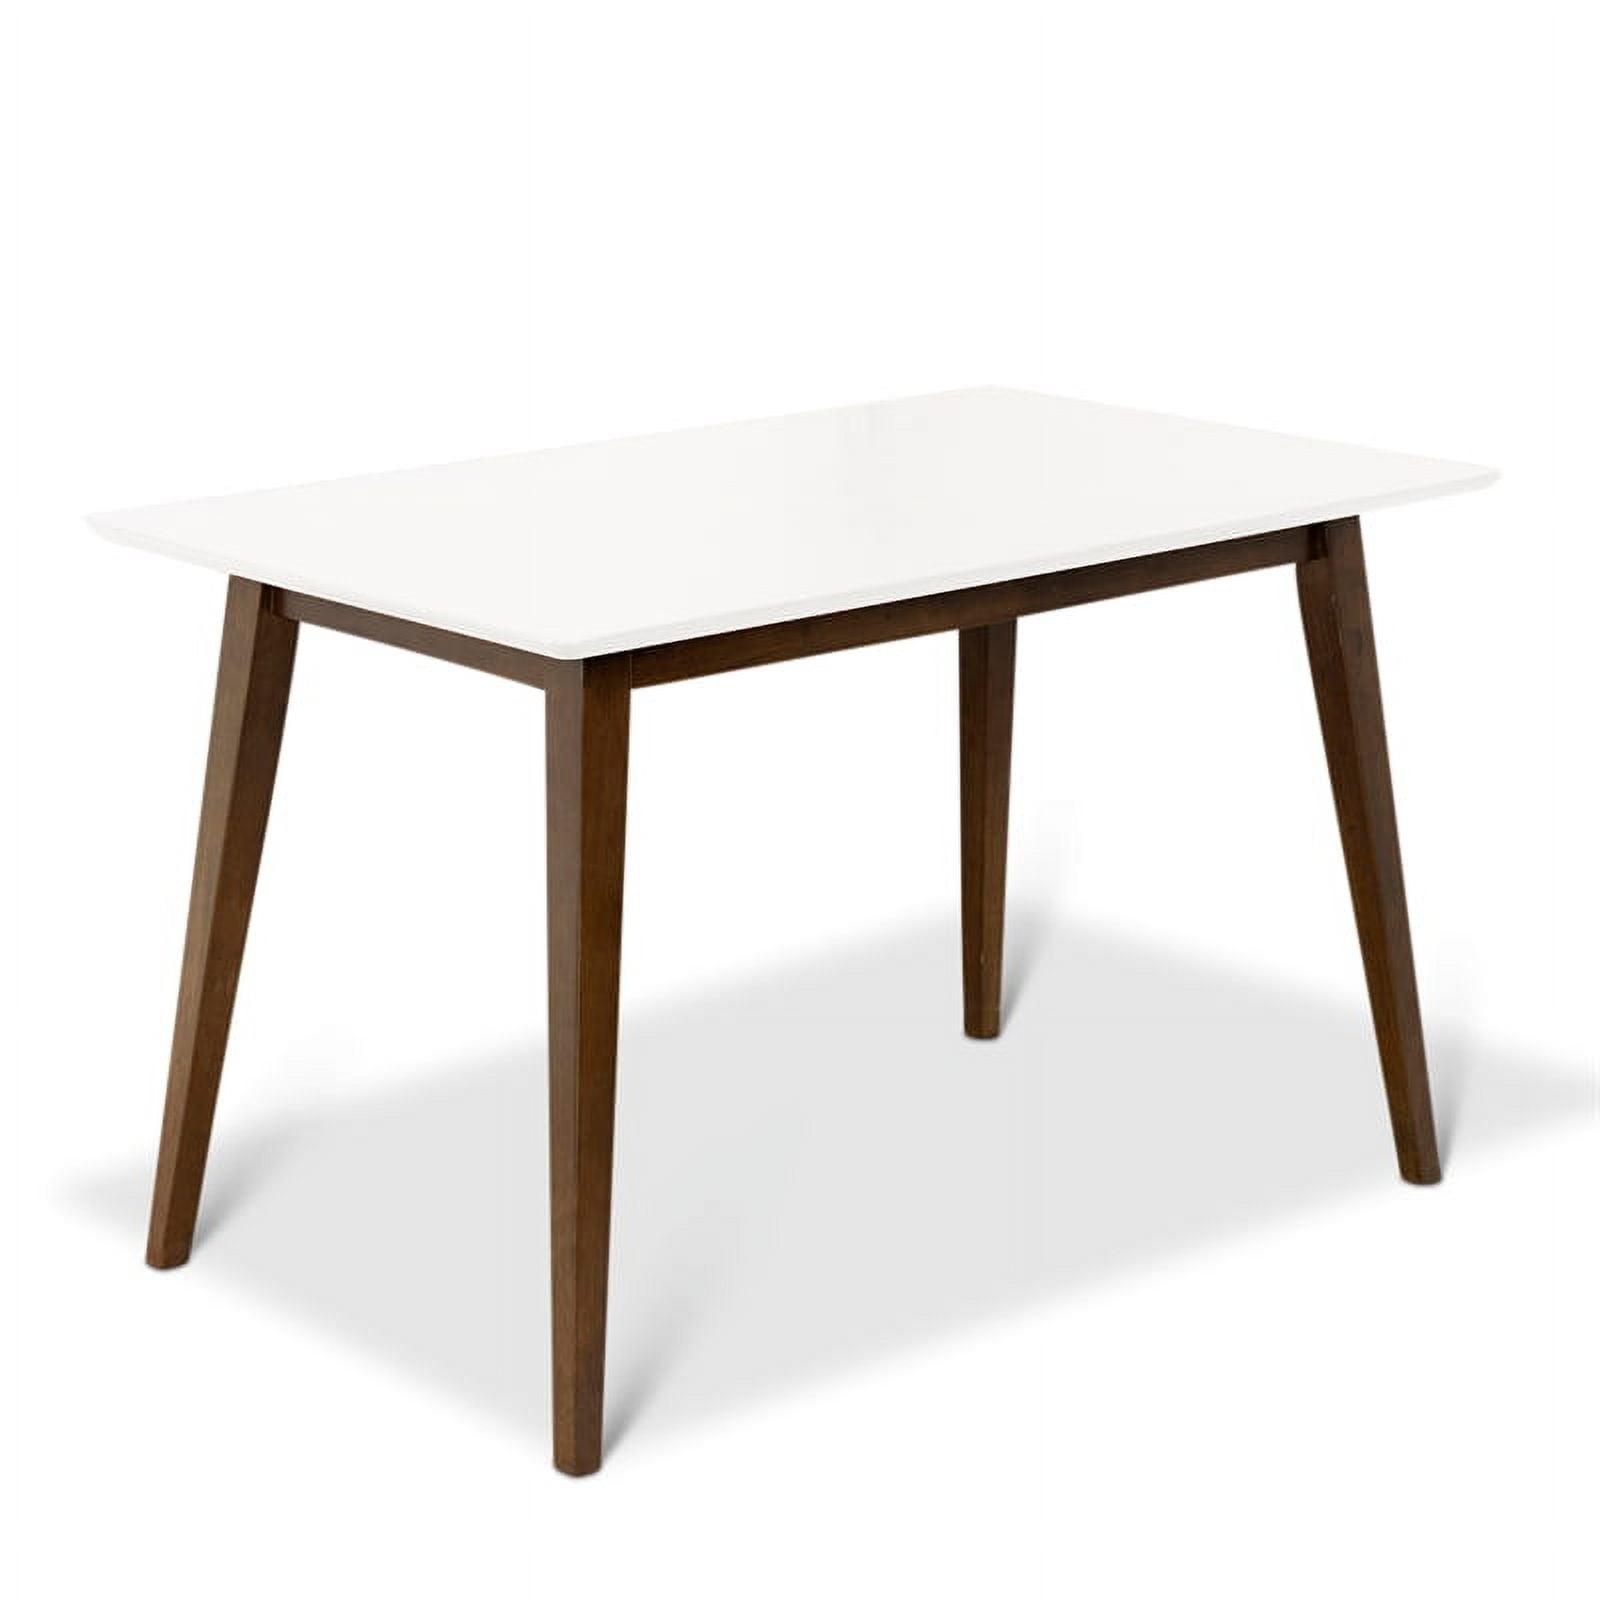 Mid-Century Modern 47" Solid Wood Dining Table, Walnut & White